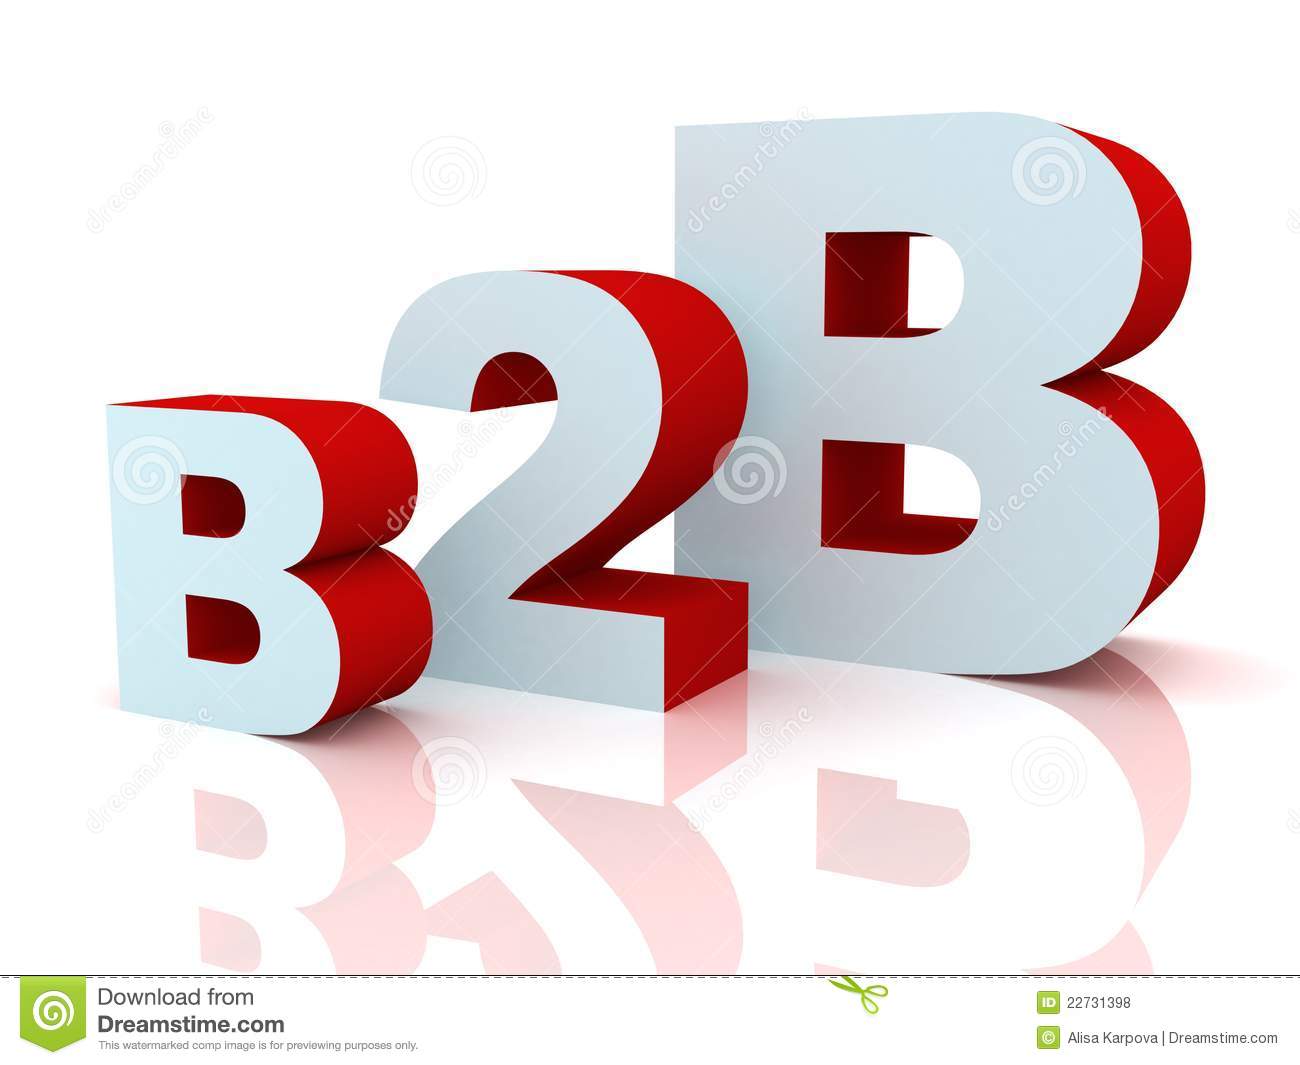 3d b2b red and blue letters on white background